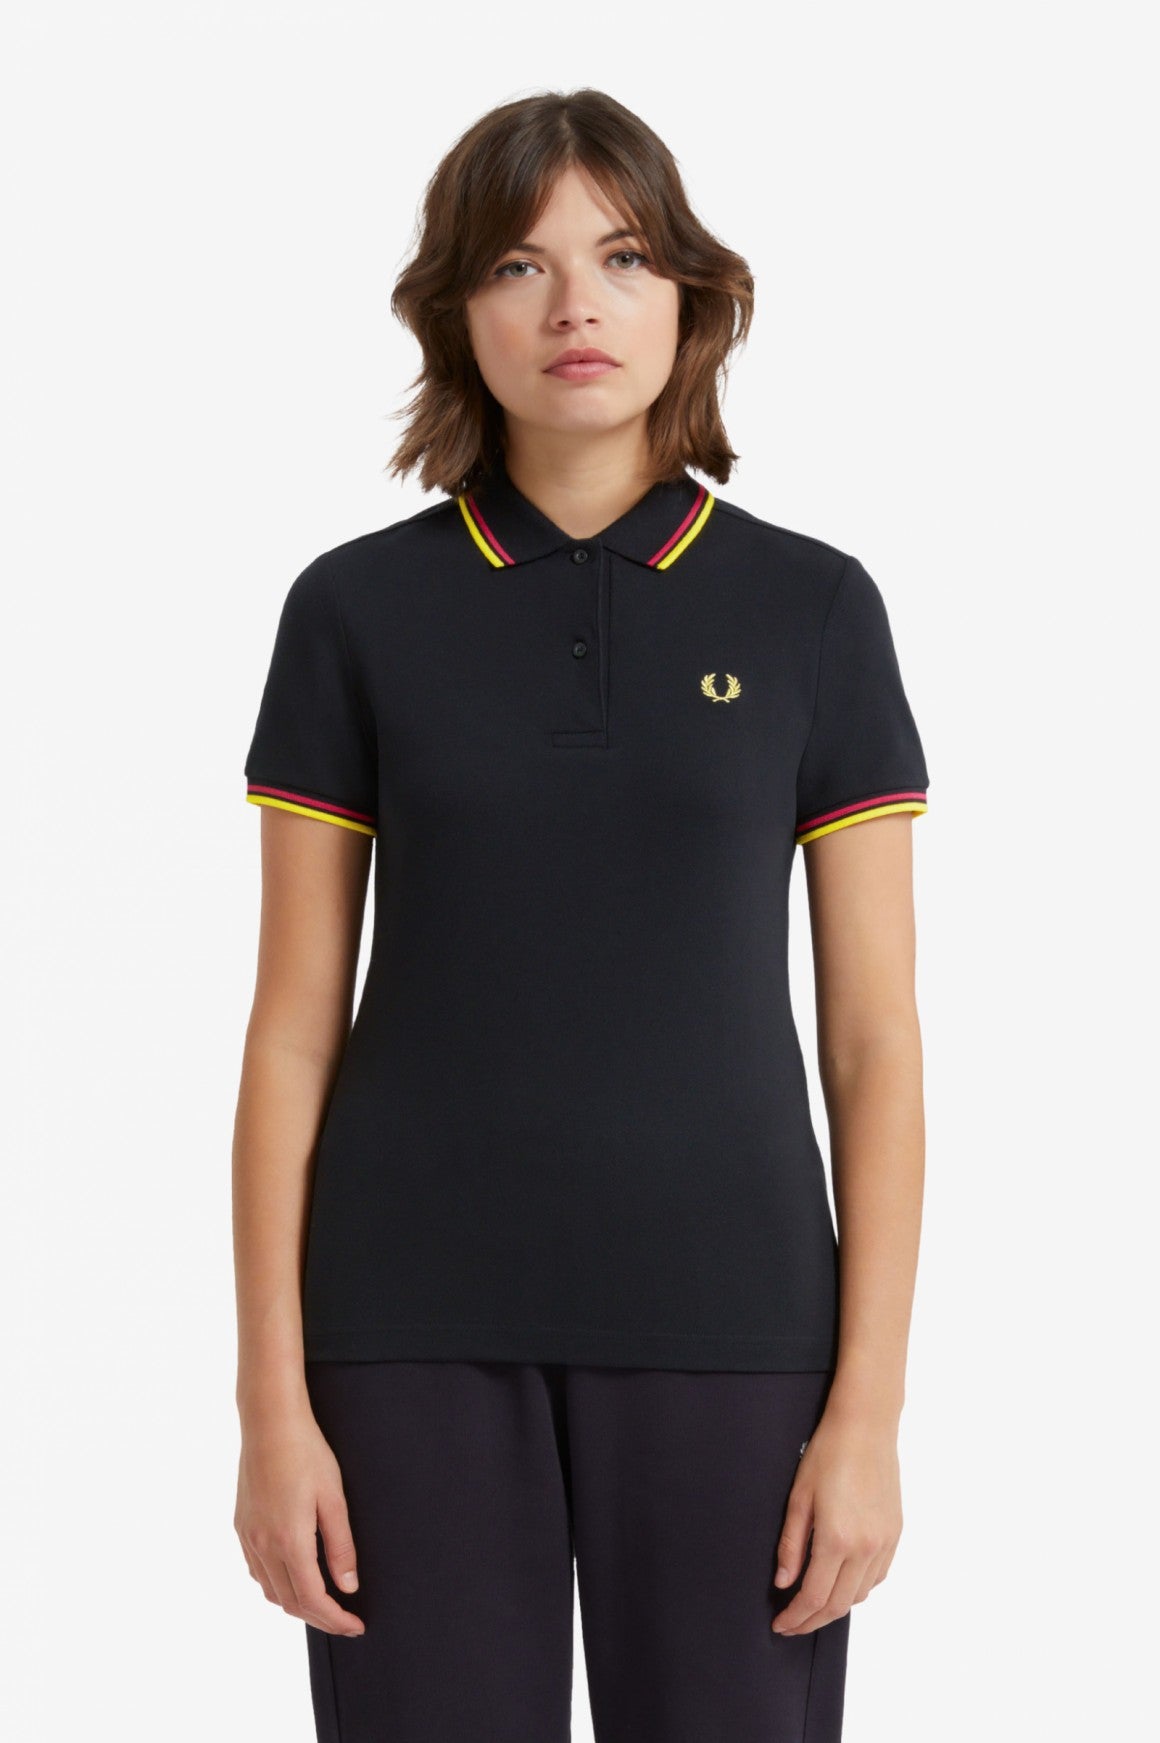 LADIES TWIN TIPPED FRED PERRY SHIRT (BLACK/LOVE POTION/GOLDEN KIWI)